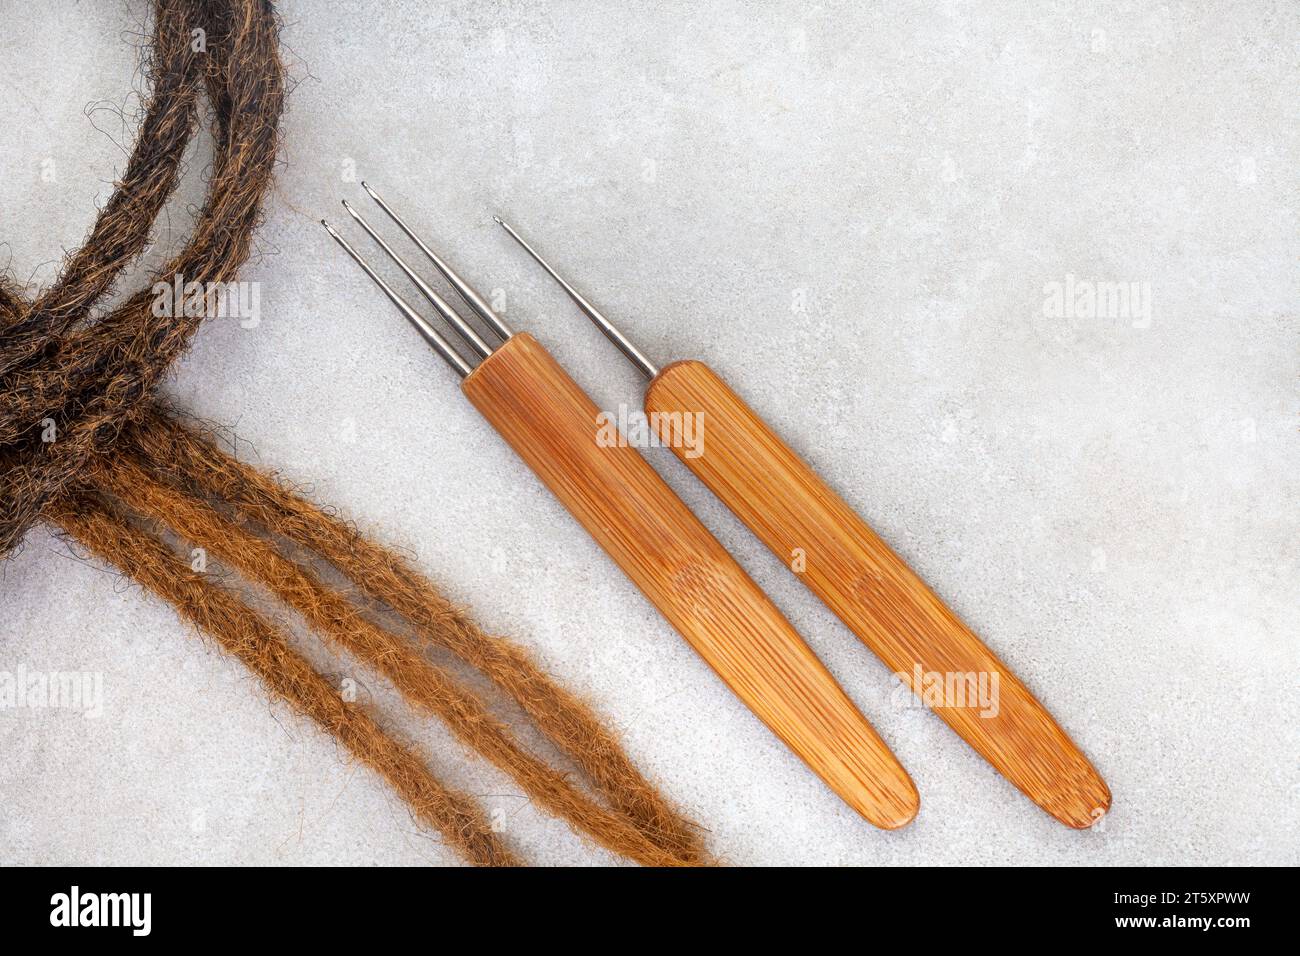 Hair crochet needles and decorative beads for dreadlocks and braids on white Stock Photo